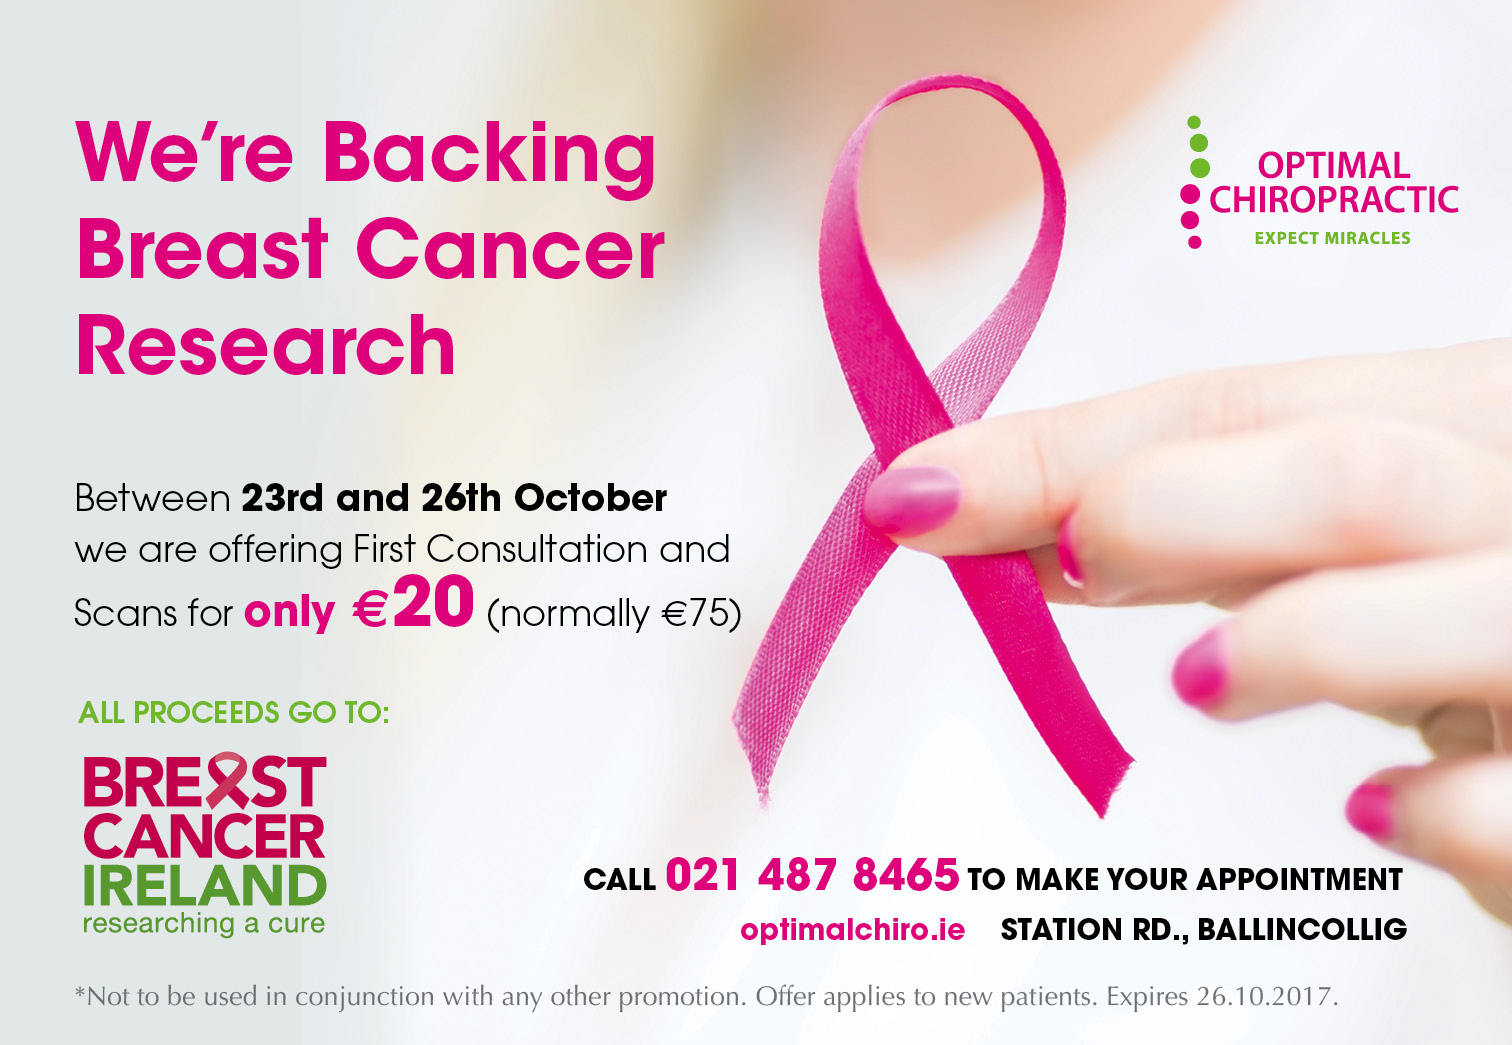 We're backing breast cancer awareness and research this October